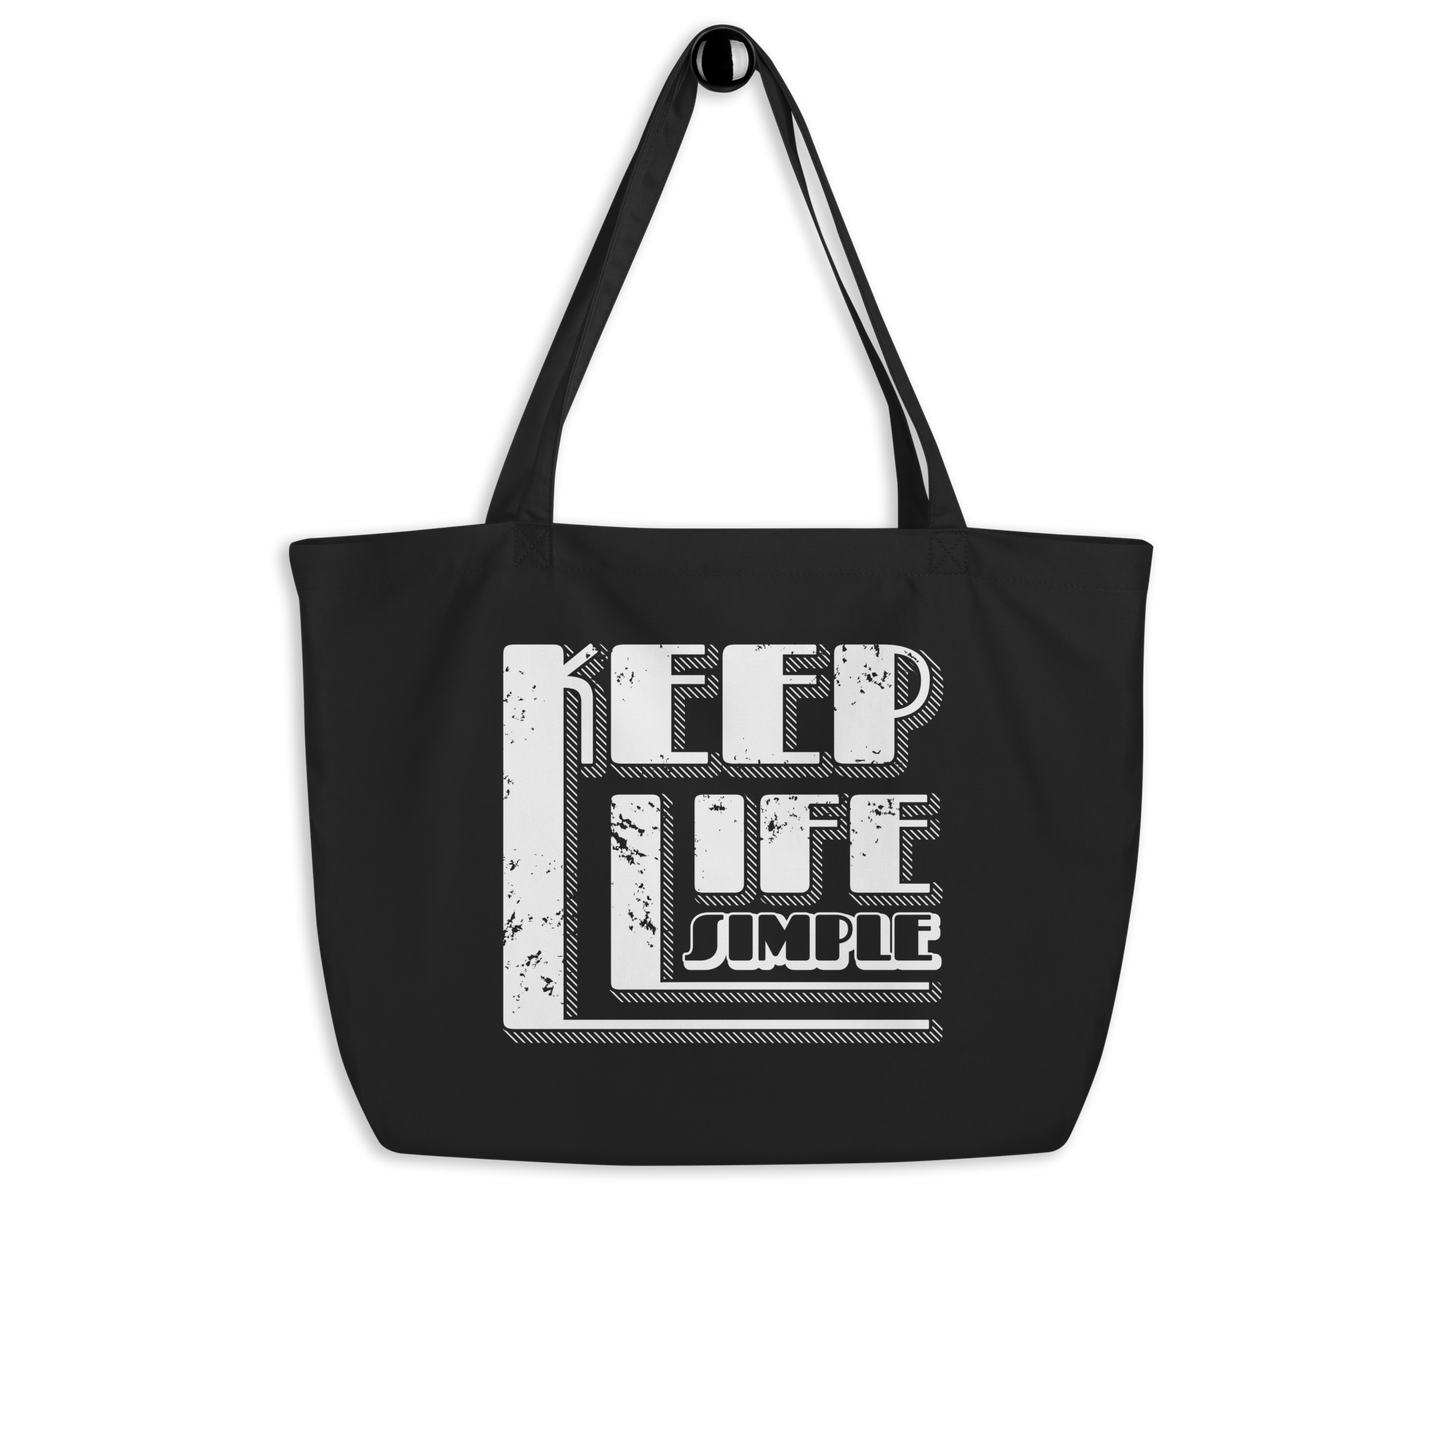 Retro Tote Bag - Keep Life Simple - Large Size Hanger